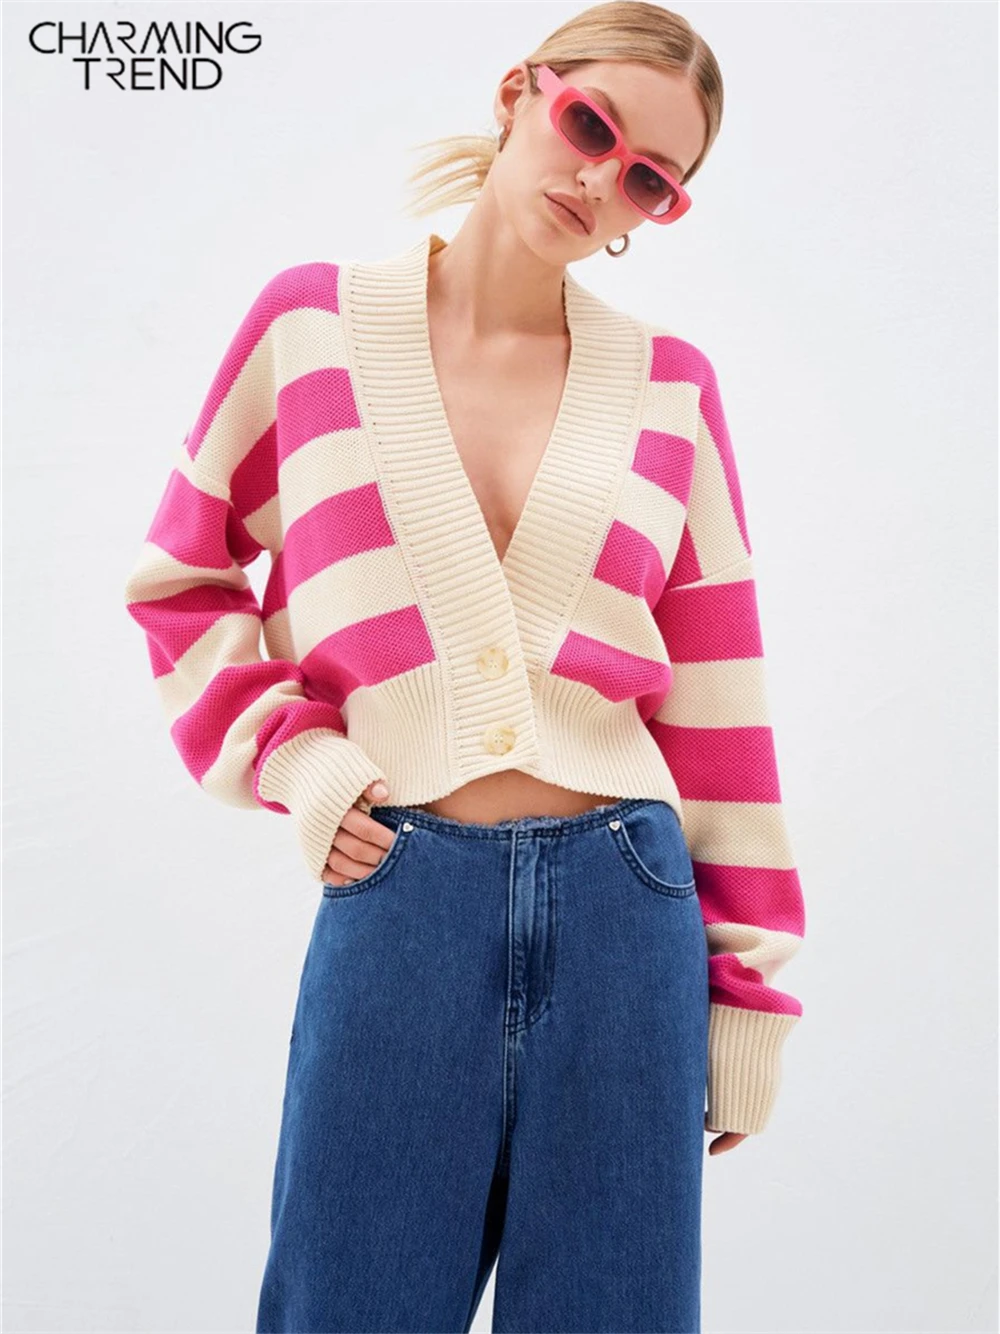 

Charmingtrend Winter Vintage Loose Sweaters Thicken Knitwear Pullovers Women Oversized Sweater Striped Top Sweaters Female